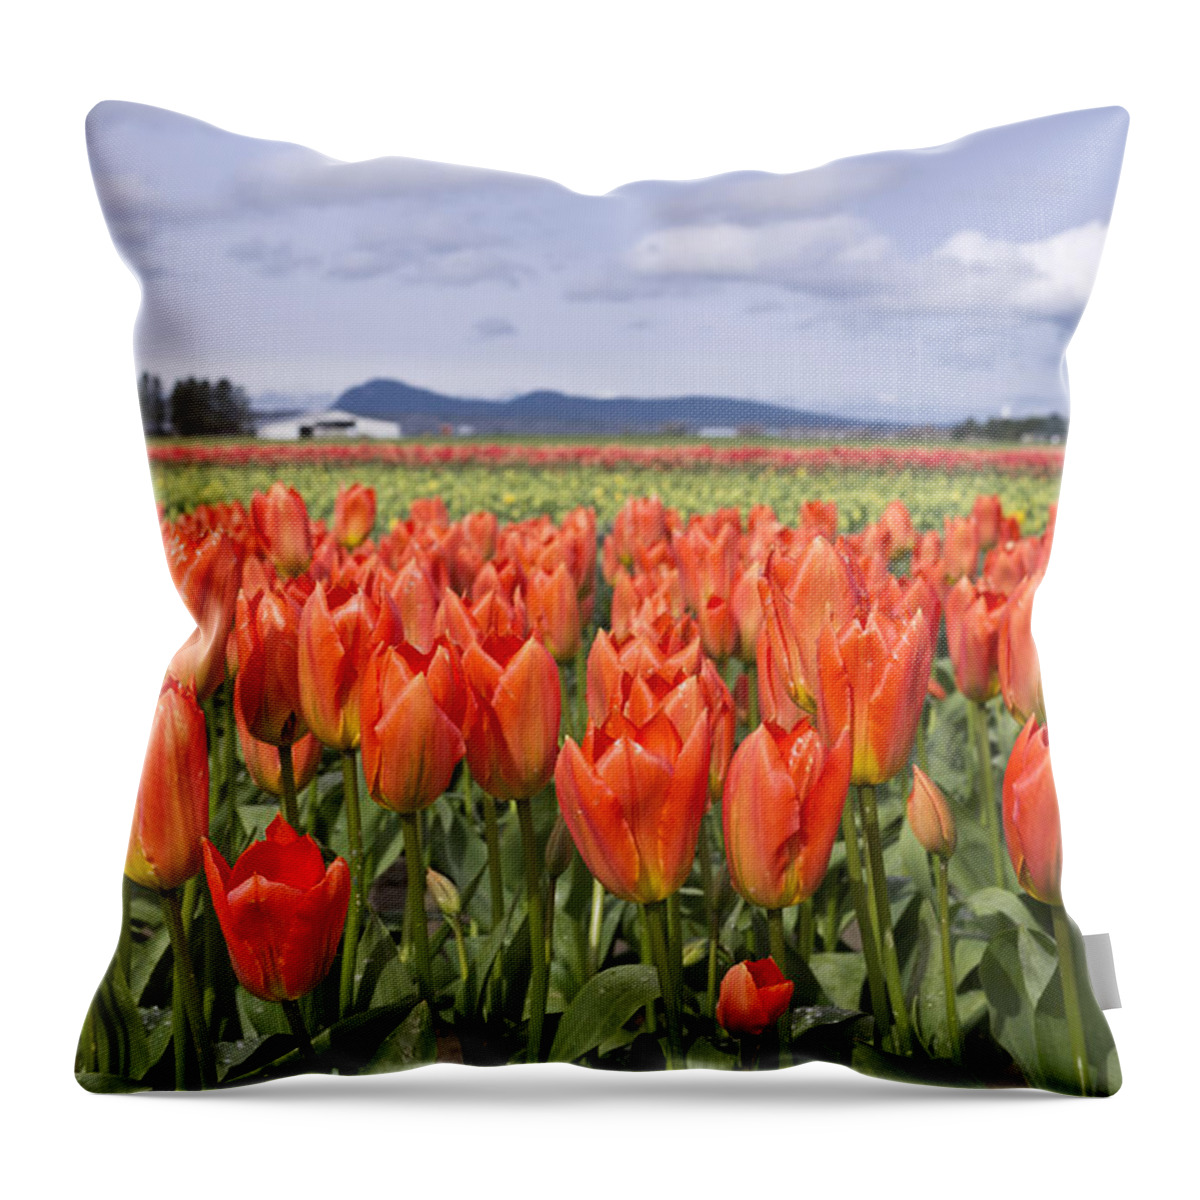 Tulip Throw Pillow featuring the photograph Tulips by Priya Ghose